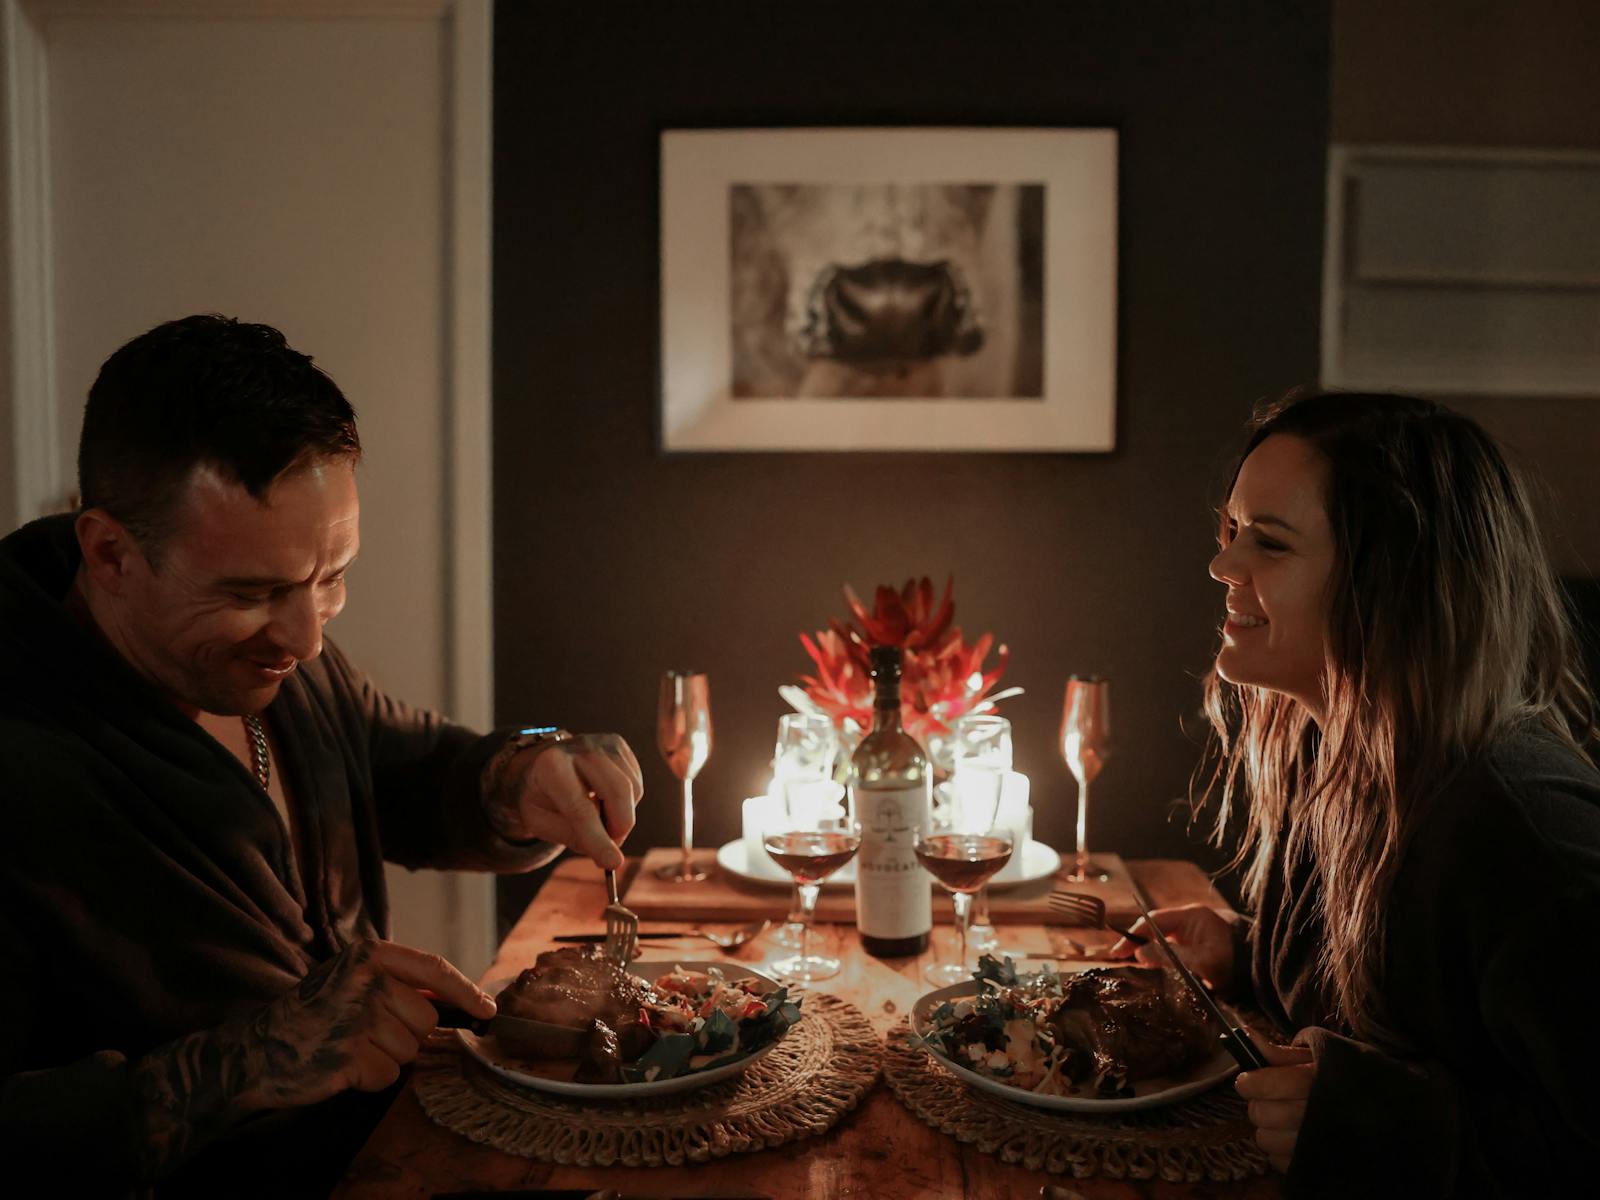 Couple enjoys dinner by candlelight on dining table, with meal they prepared in the cabin..